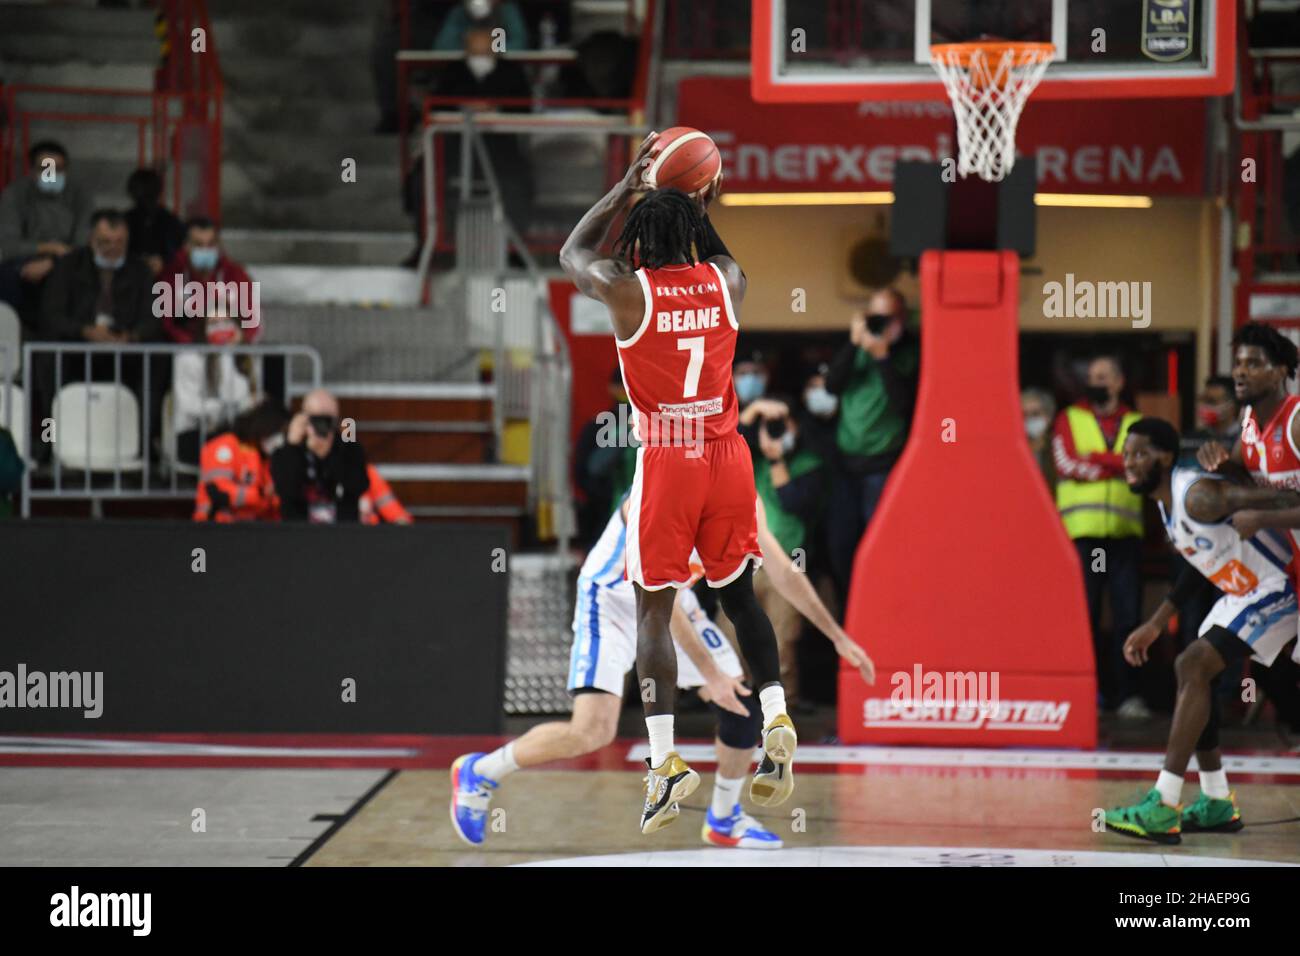 Varese, Italy. 12th Dec, 2021. -7Anthony Beane OpenJobMetis Varese during the LBA Italy Championship match between Openjobmetis Varese  vs Devi Napoli Basket, in Varese, Italy, on Dicember 12, 2021. Credit: Fabio Averna/Alamy Live News Stock Photo